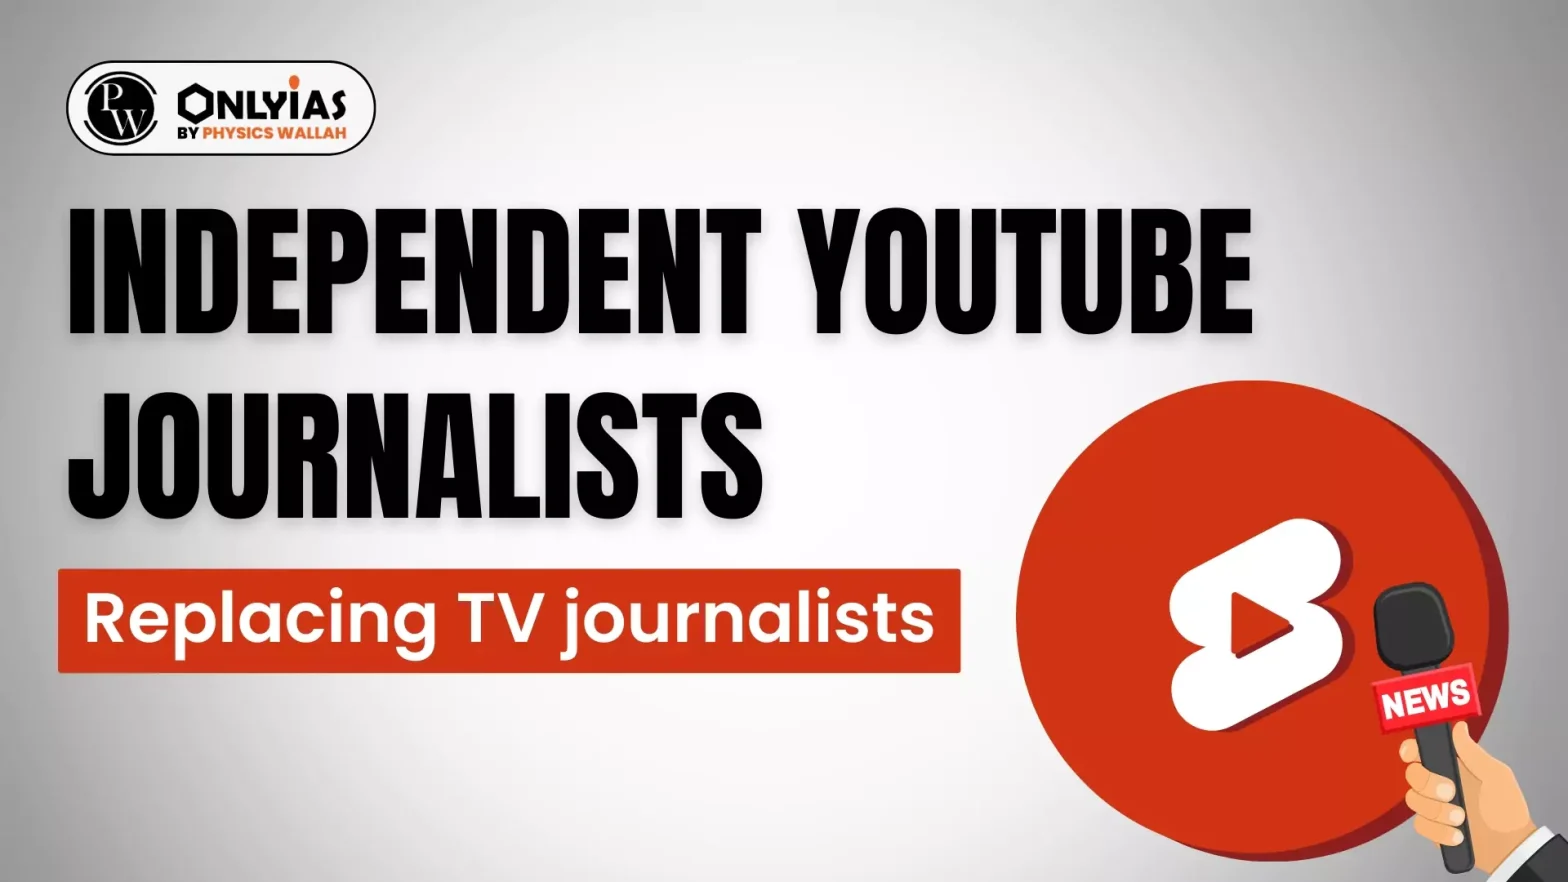 Independent YouTube Journalists Replacing TV Journalists